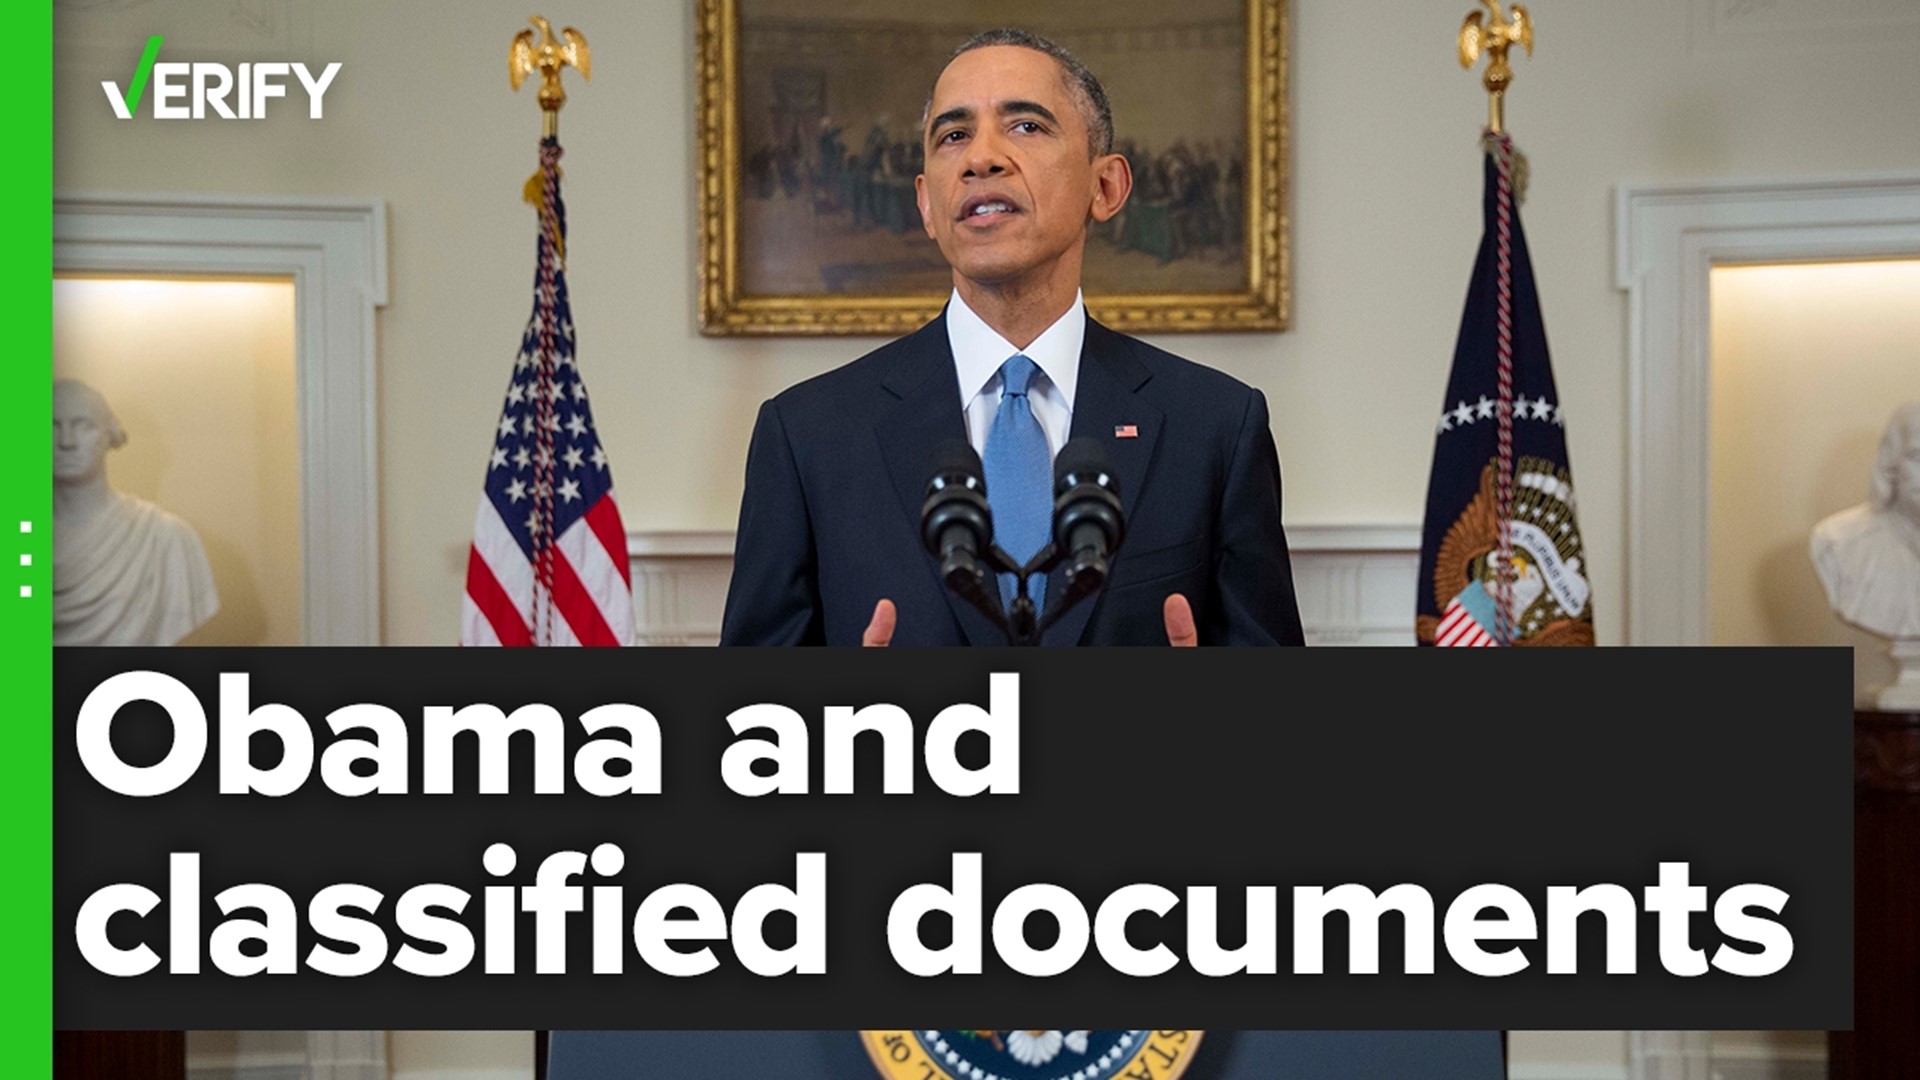 Did former President Barack Obama keep 33 million pages of his administration's records? The VERIFY team confirms this is false.